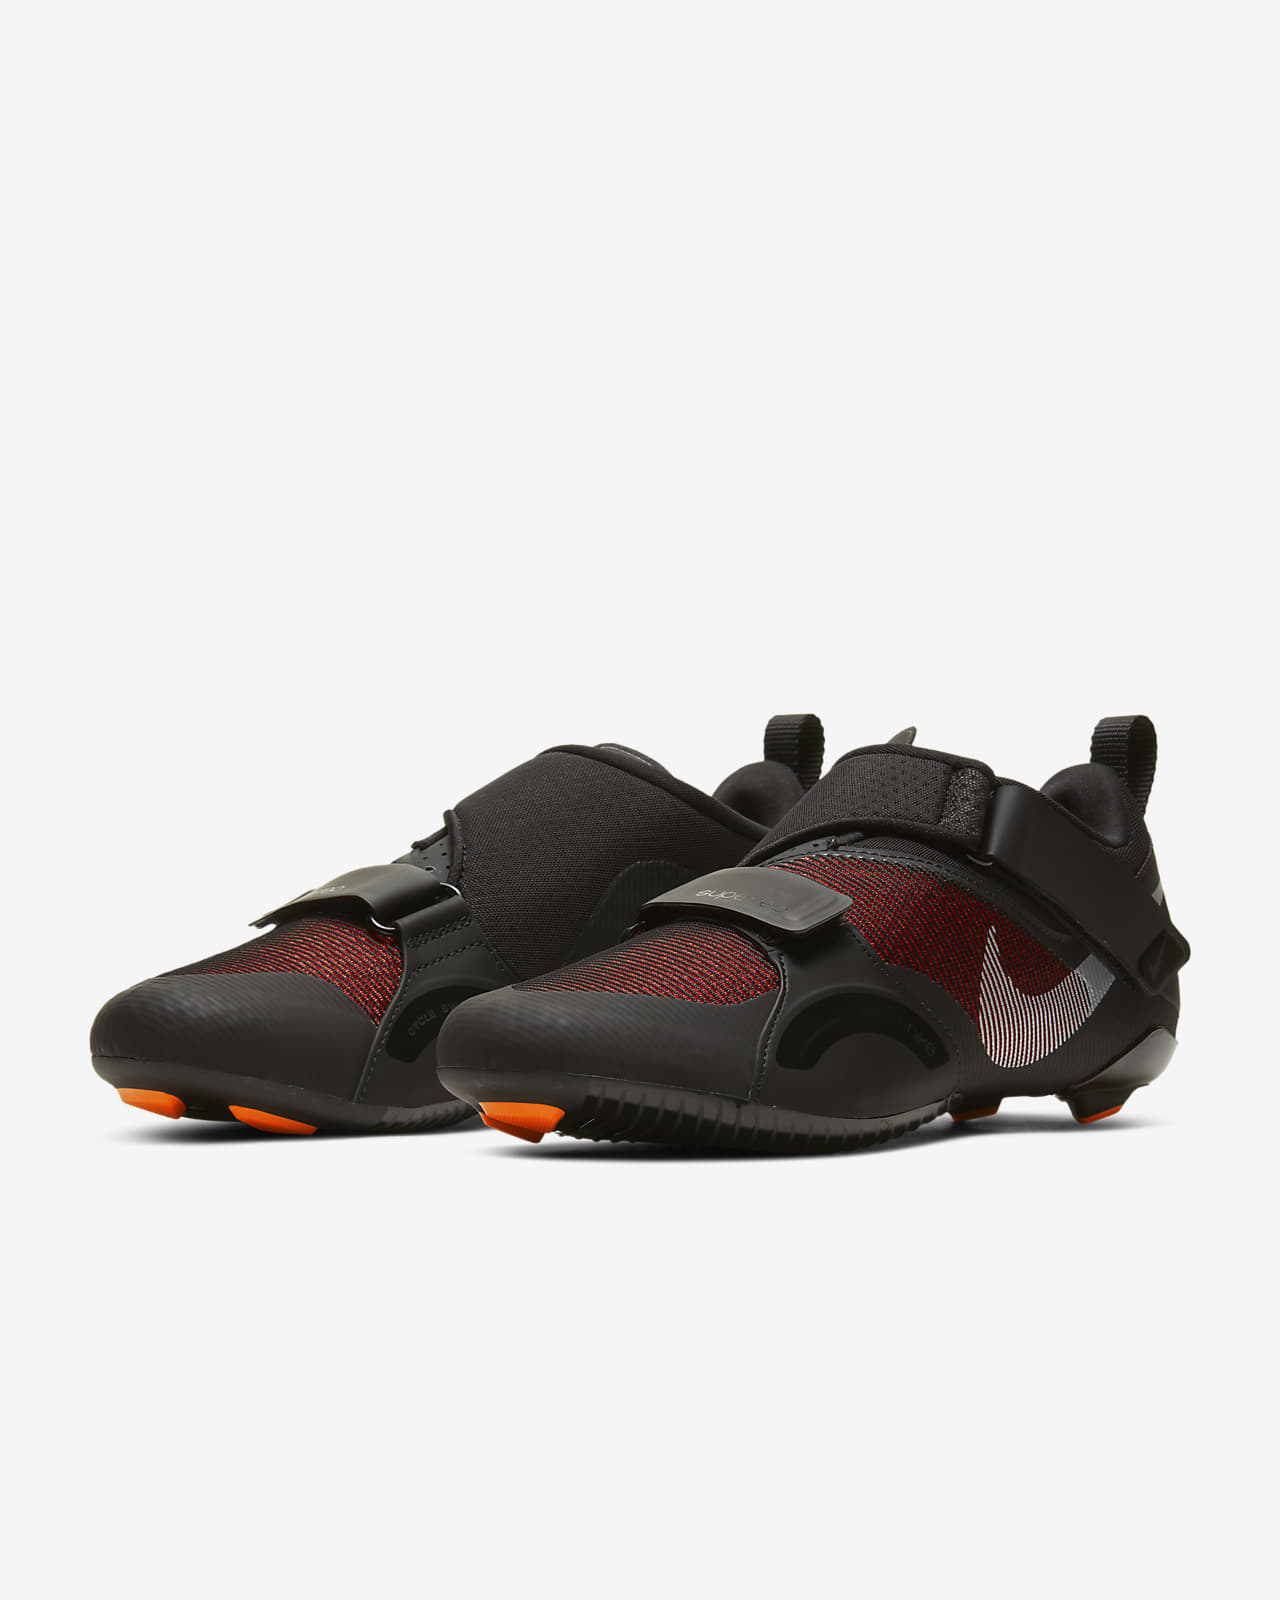 nike superrep spin shoes